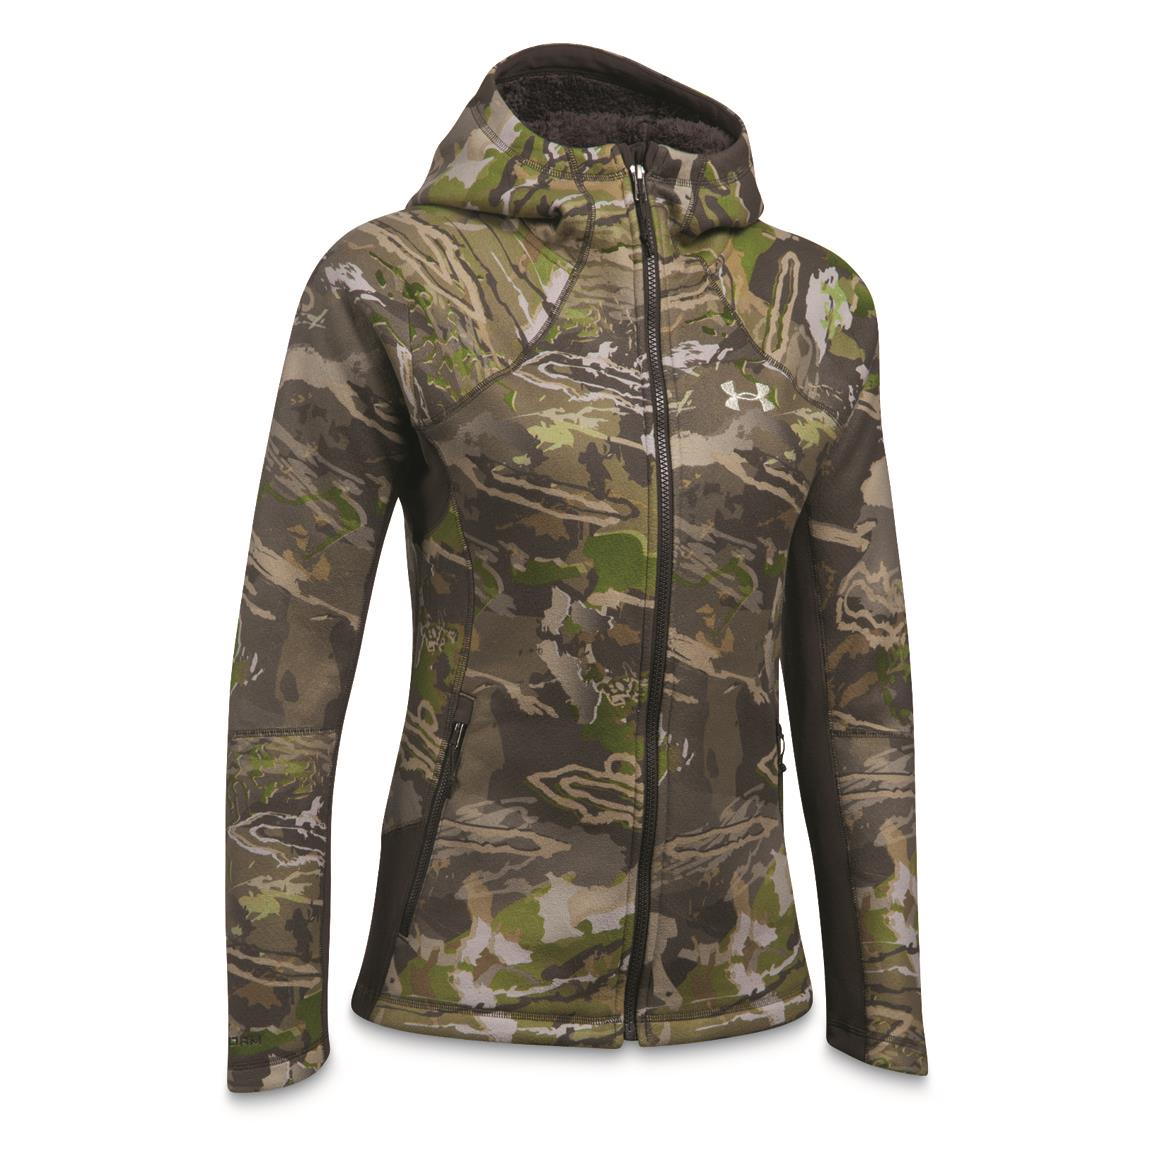 women's under armour camo hunting pants